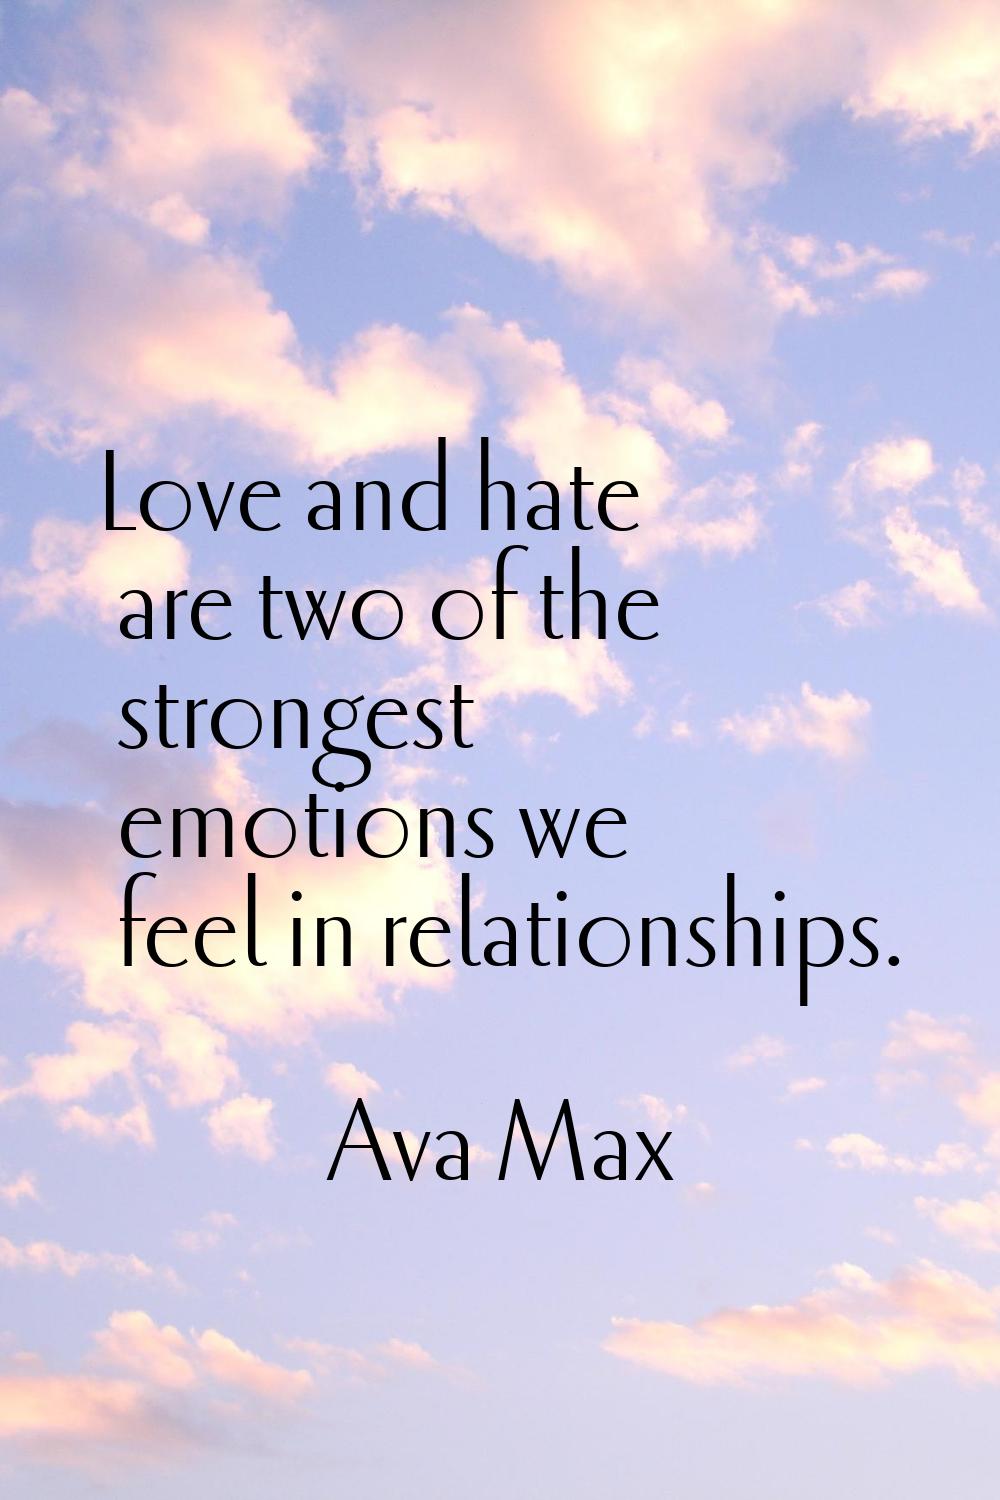 Love and hate are two of the strongest emotions we feel in relationships.